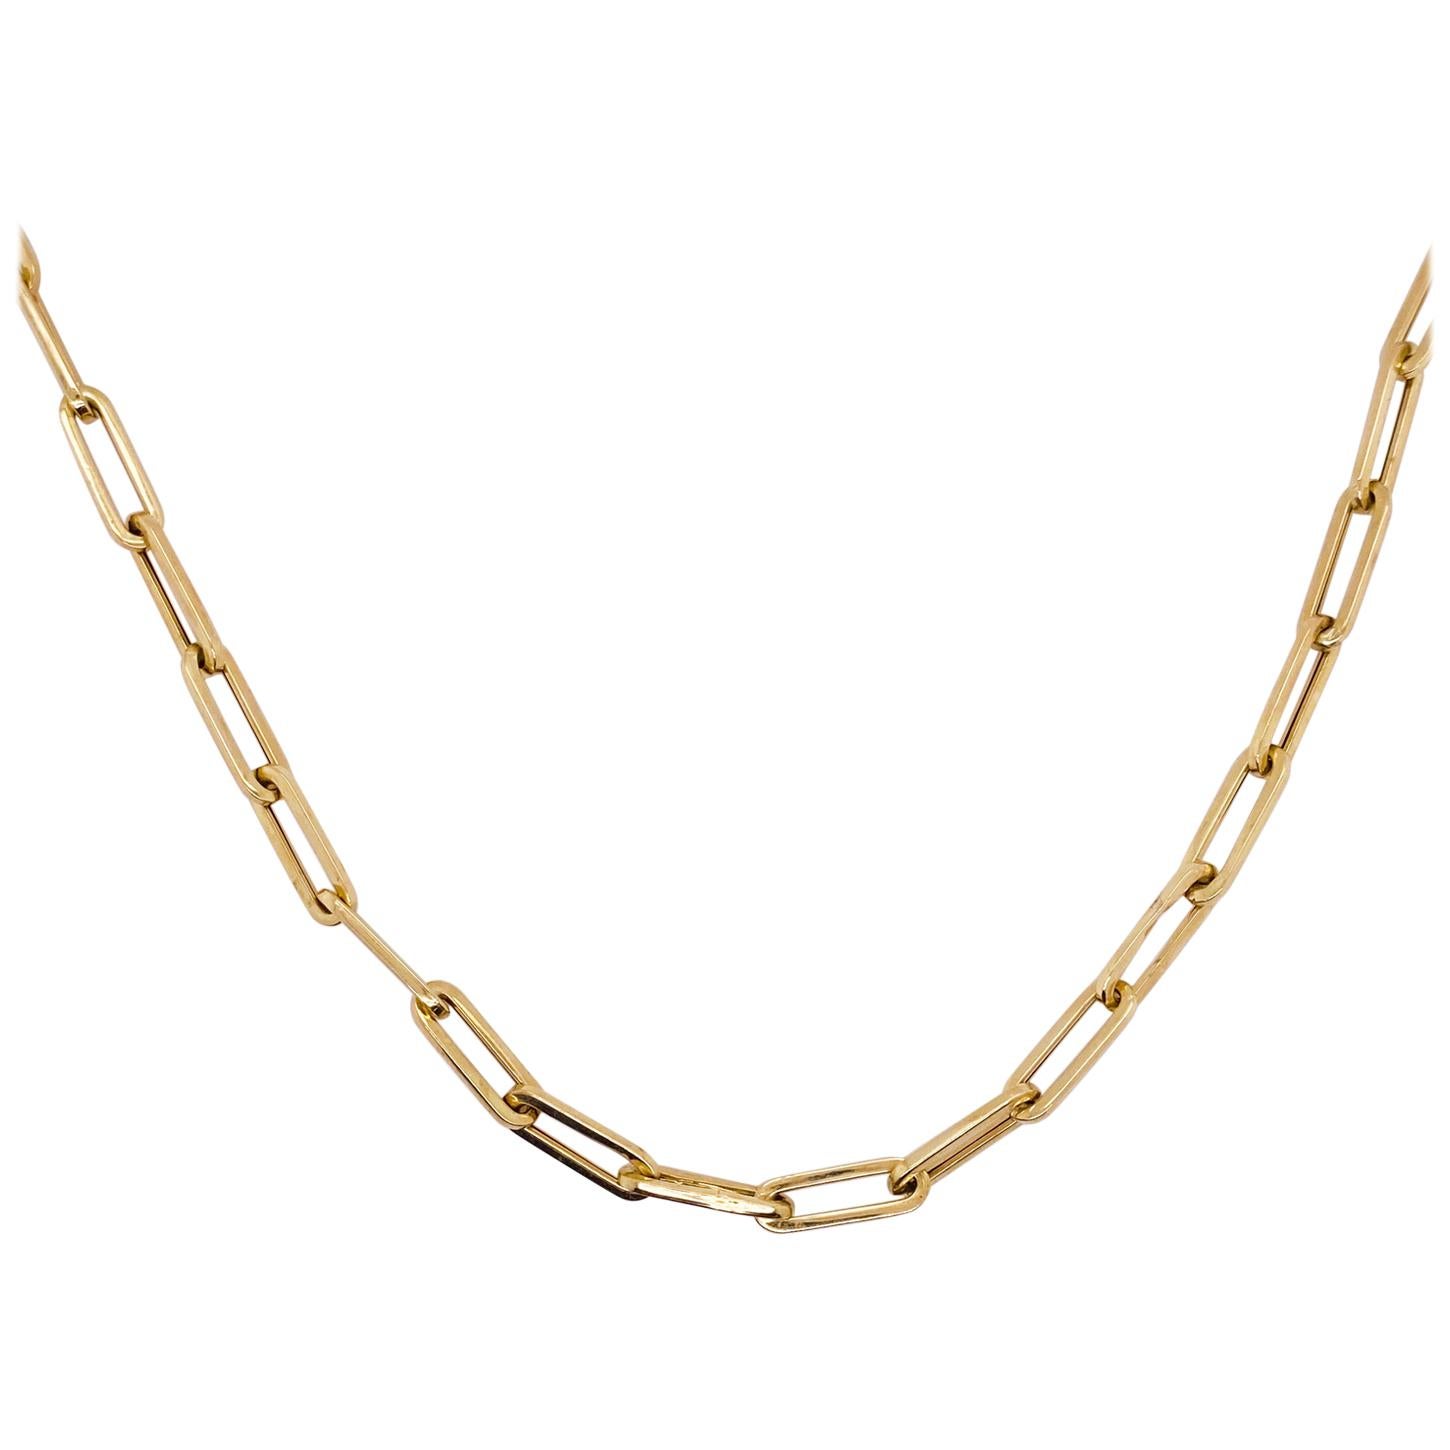 Paperclip chains are the latest fine jewelry fashion trend in 2020! They are stylish, modern and compliment any outfit! This 4.2 millimeter. wide paperclip chain necklace is a great width for a statement necklace. You can wear it on its own or pair